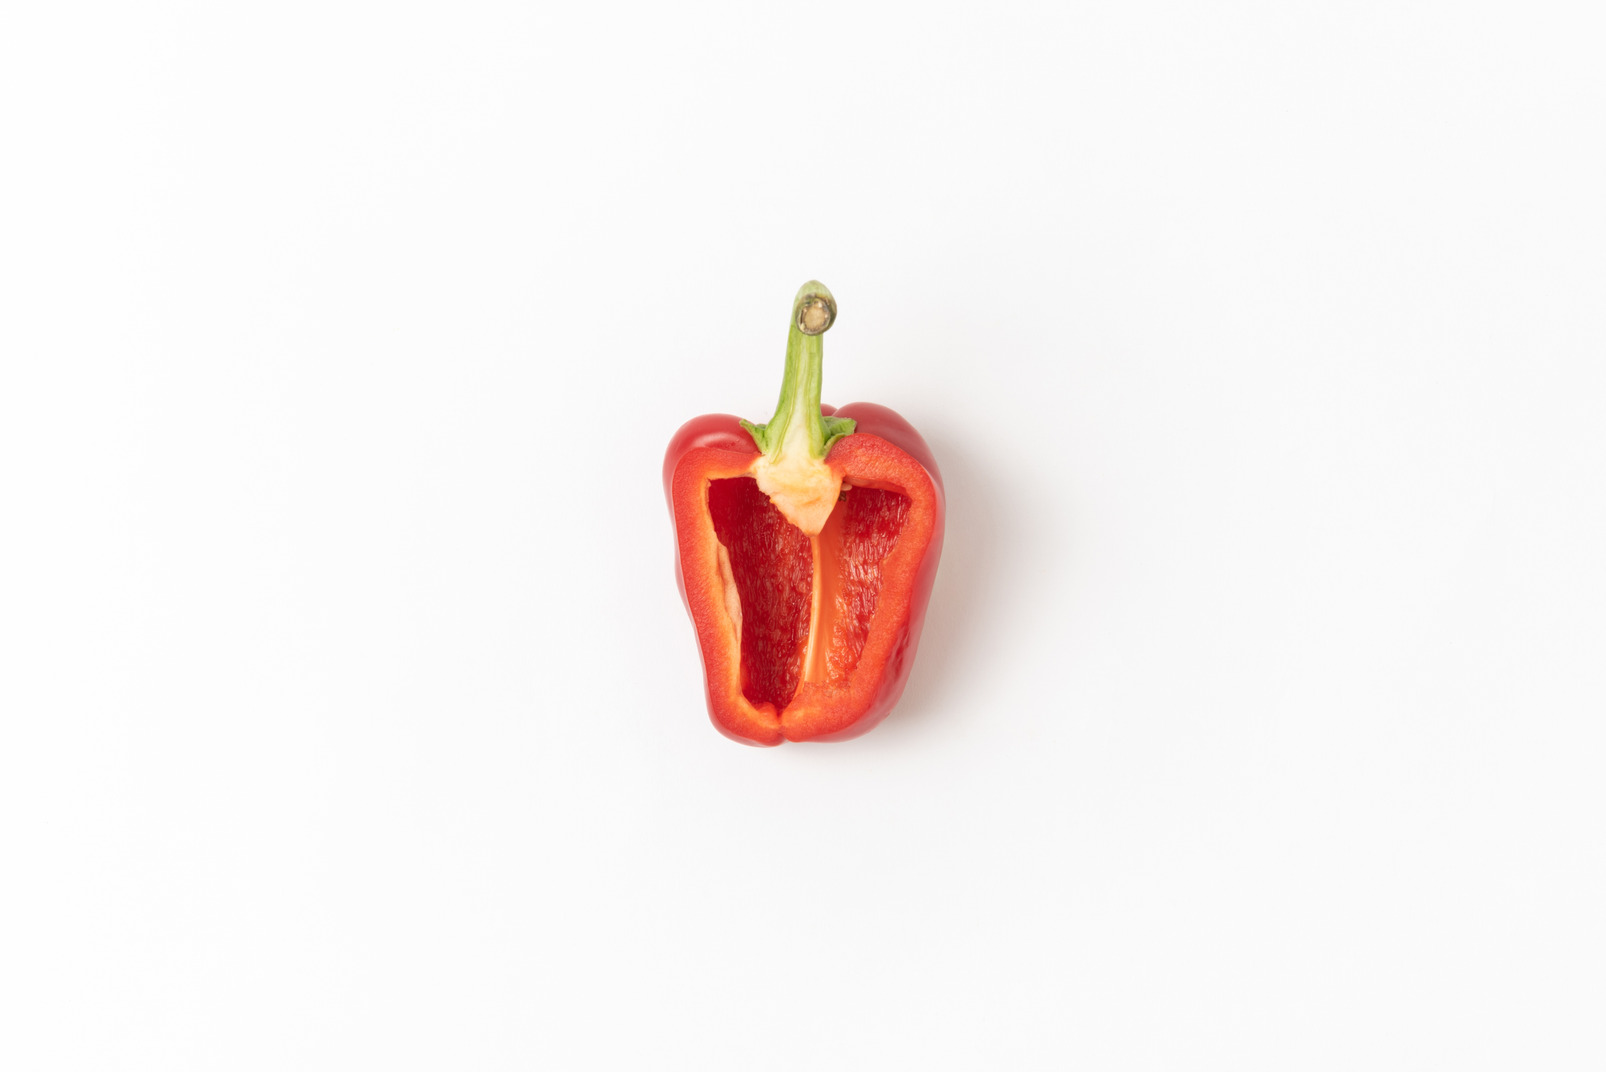 Bell pepper could be a snack option too